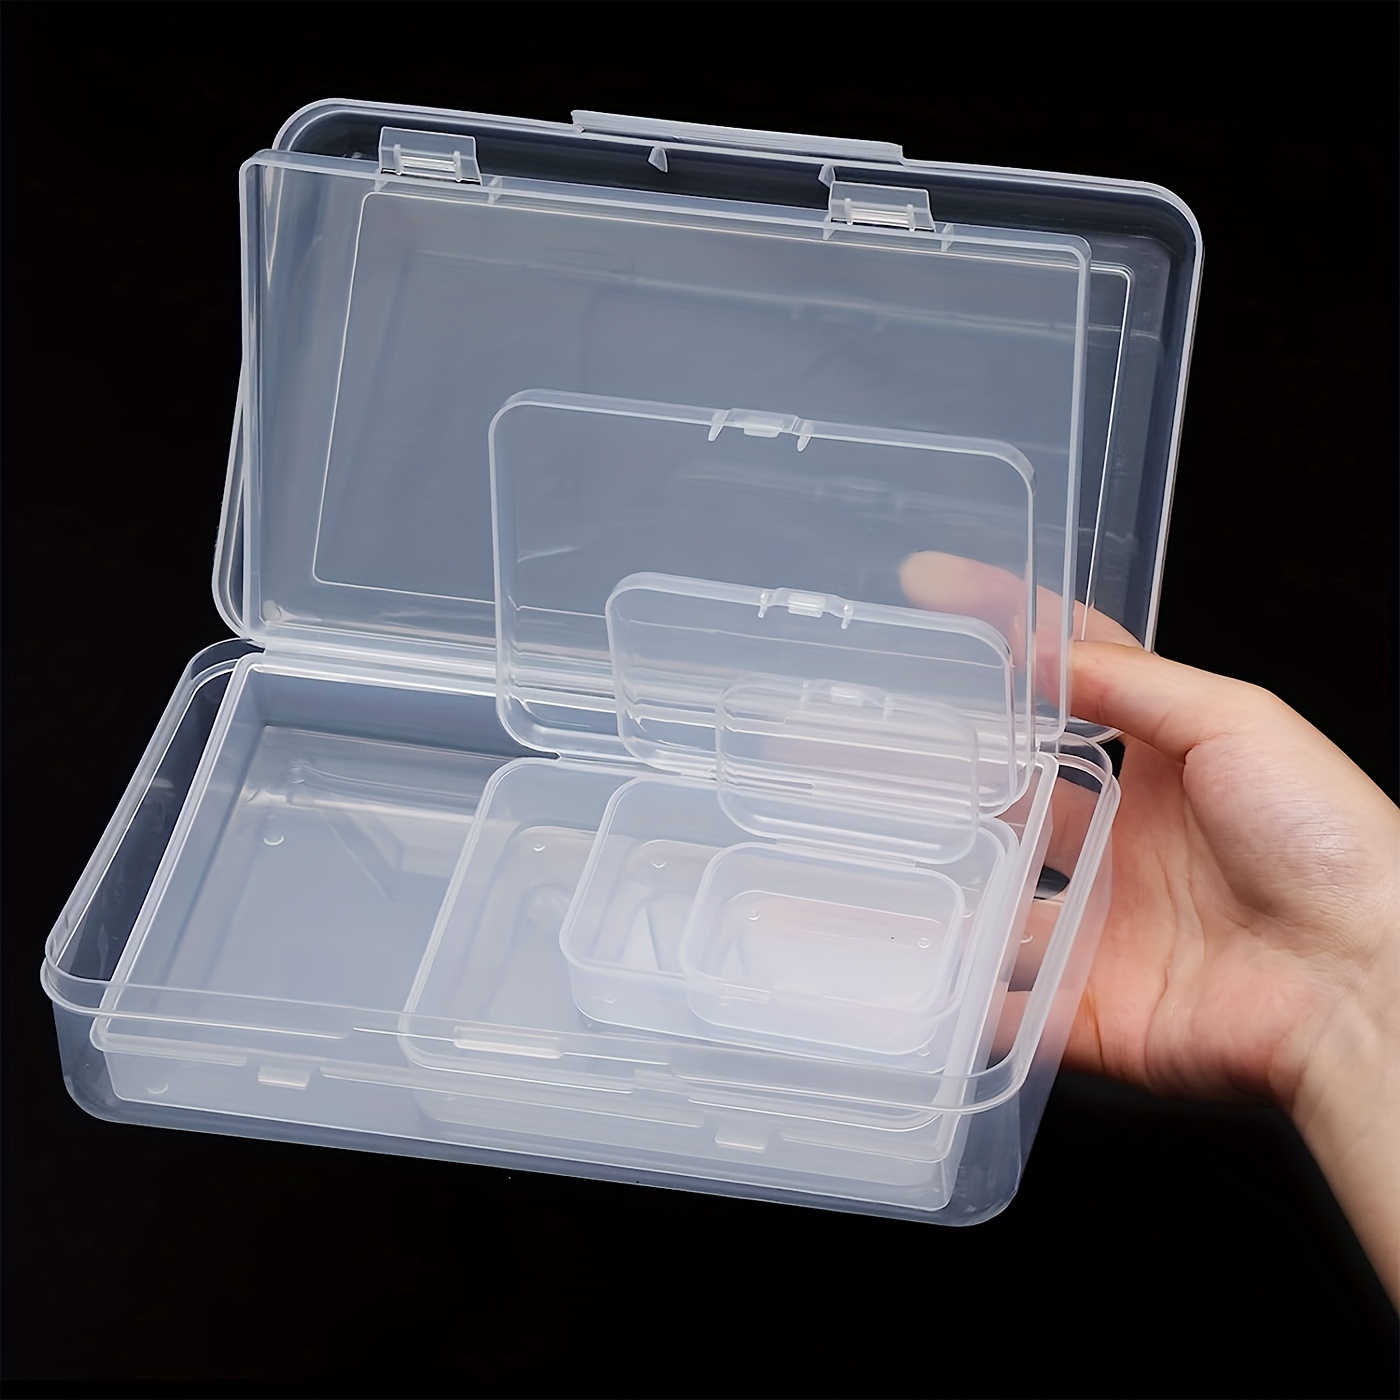 

28 Pcs Small Plastic Storage Boxes Craft Organizers Rectangular Containers With Lids For Bead, Jewelry, Office Supplies Small Items